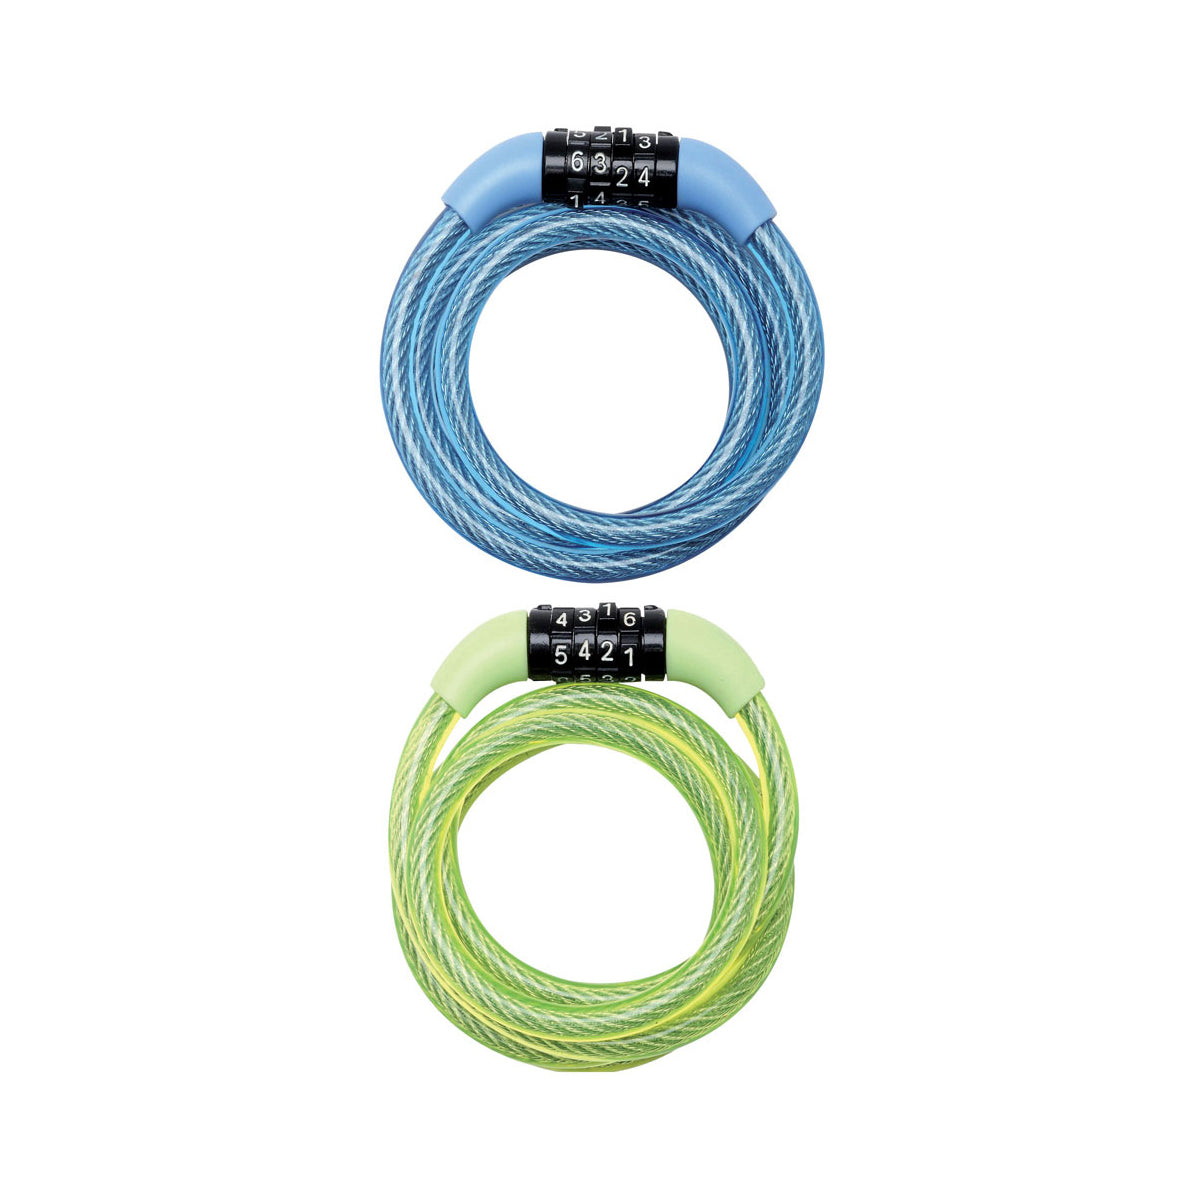 Masterlock 4 DIGIT FIXED COMBINATION  COILED STEEL CABLE LOCK  COLOURS (6PCS = 1BOX - LIGHT BLUE + LIGHT GREEN)